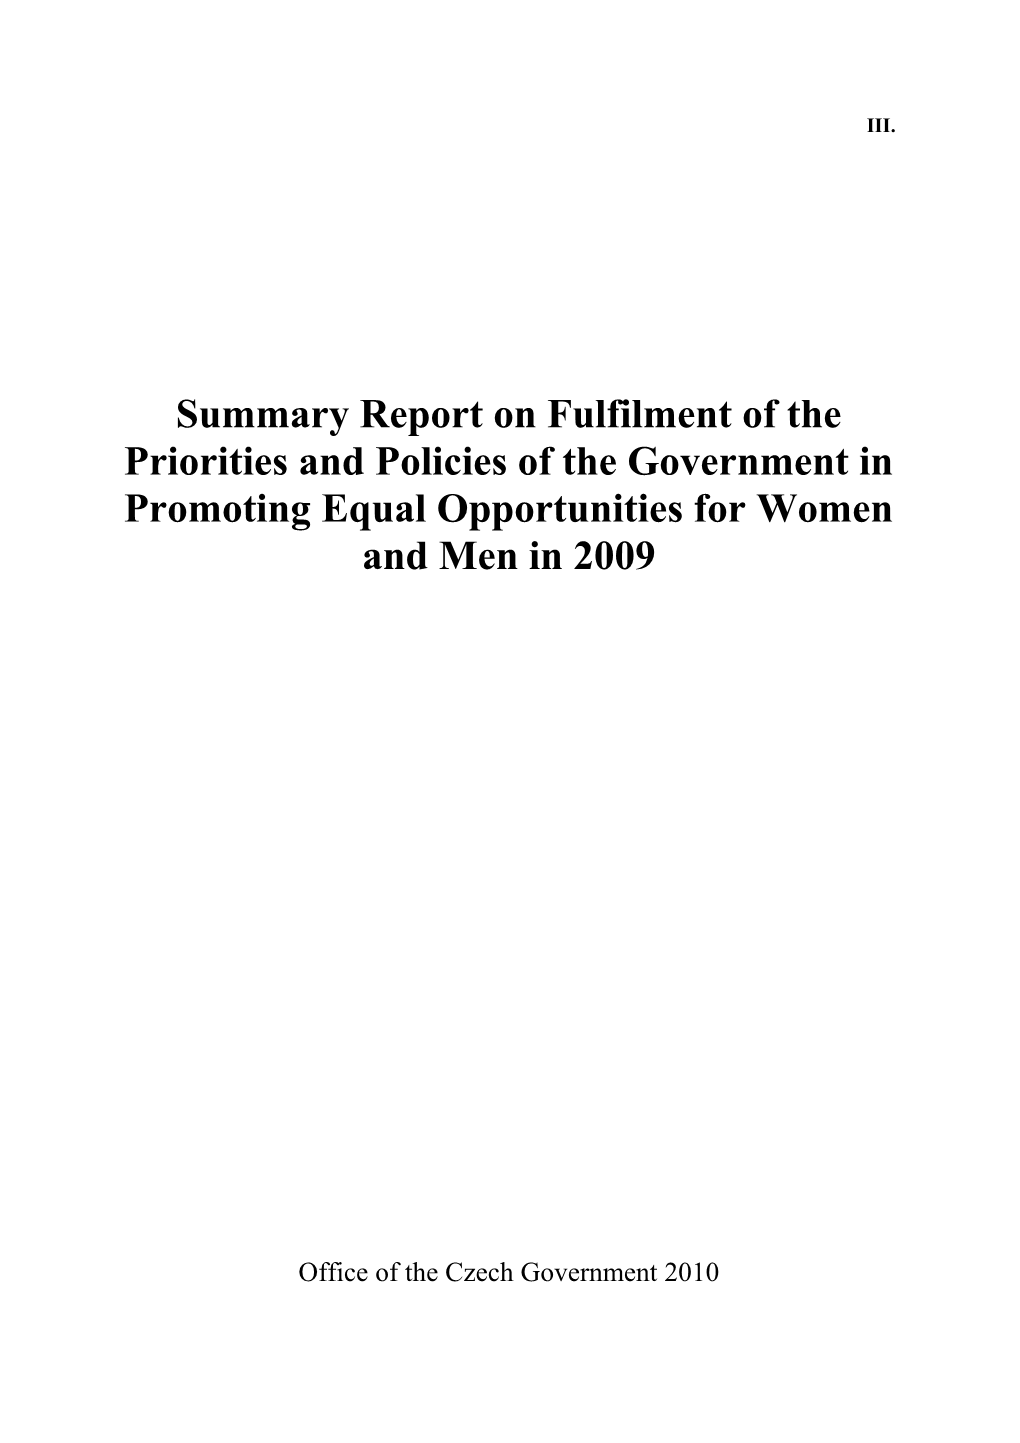 Summary Report on Fulfilment of the Priorities and Policies of the Government in Promoting